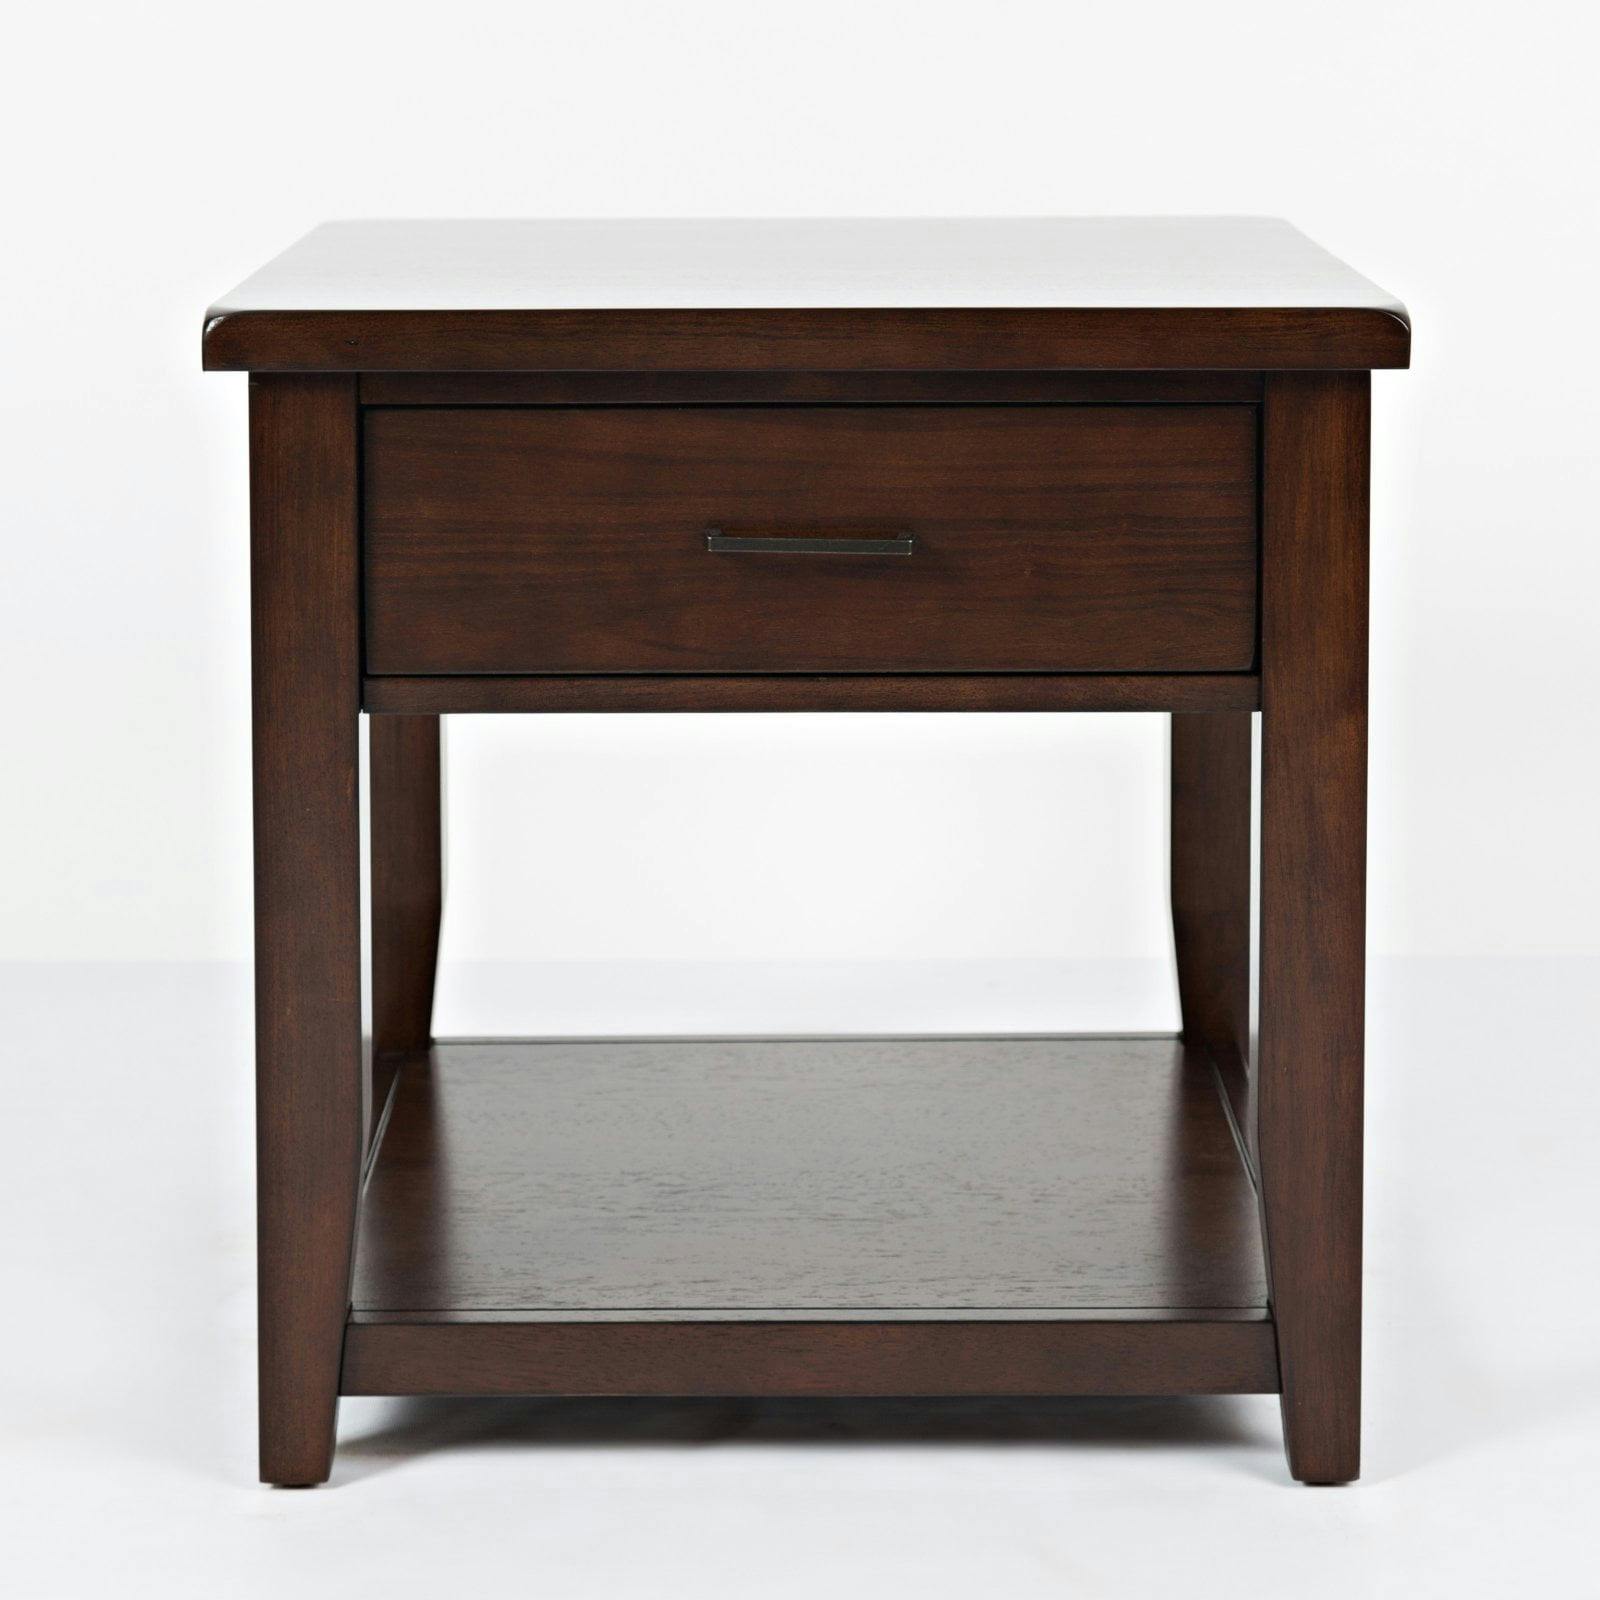 Classic Brown Square Wood End Table with Storage